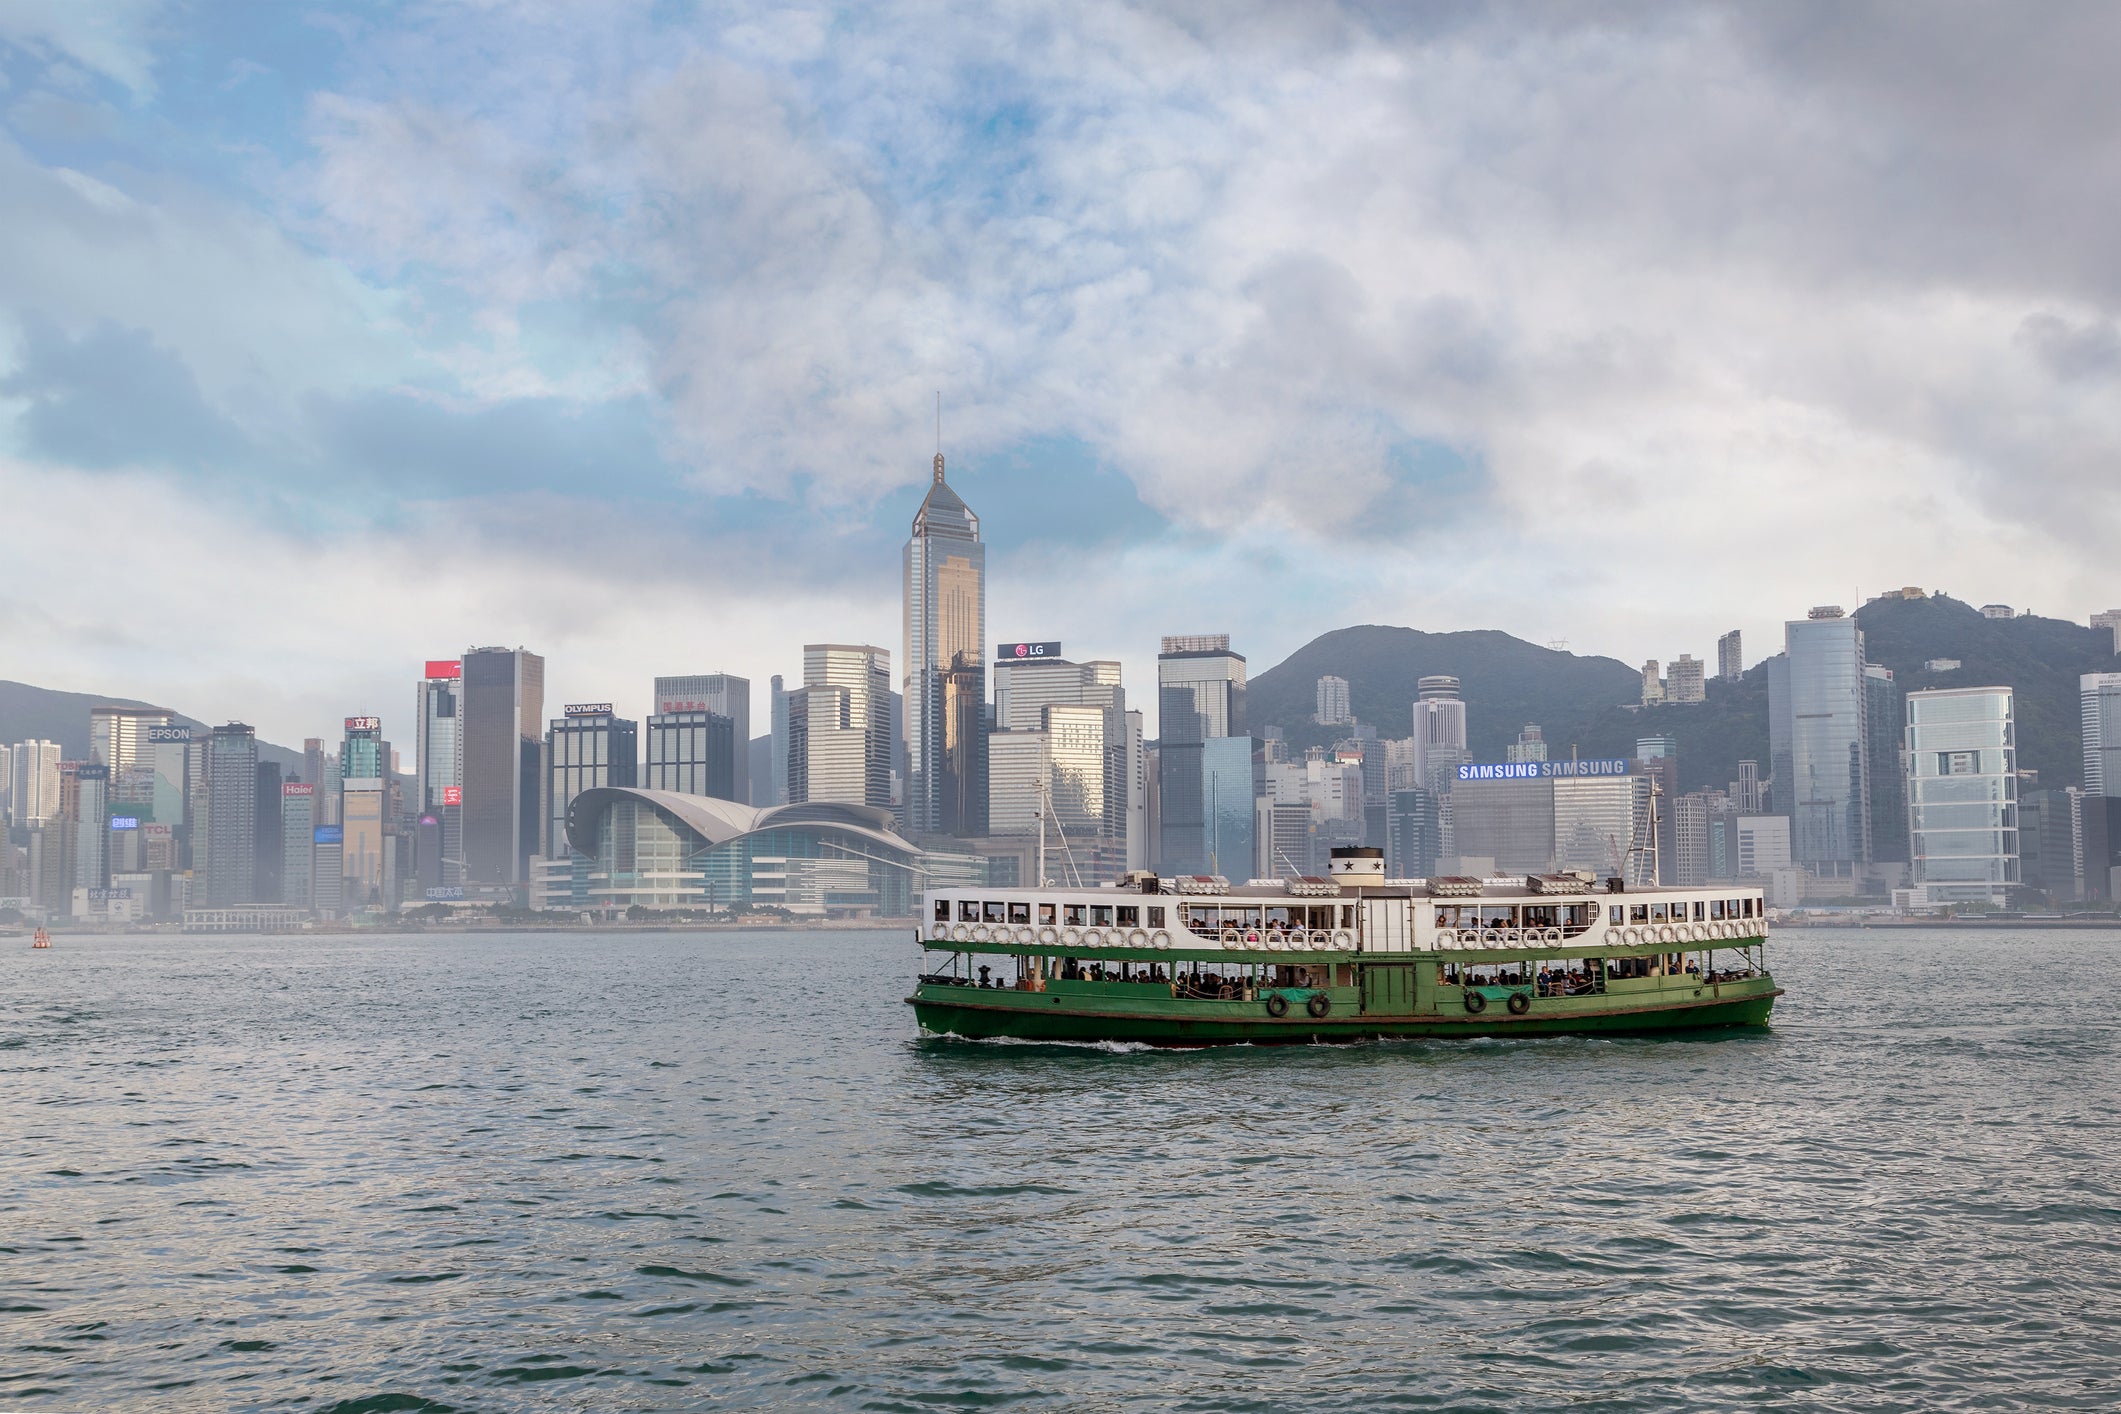 Much of Hong Kong’s transport has run into issues – ferries are one of the few modes that have been left unscathed